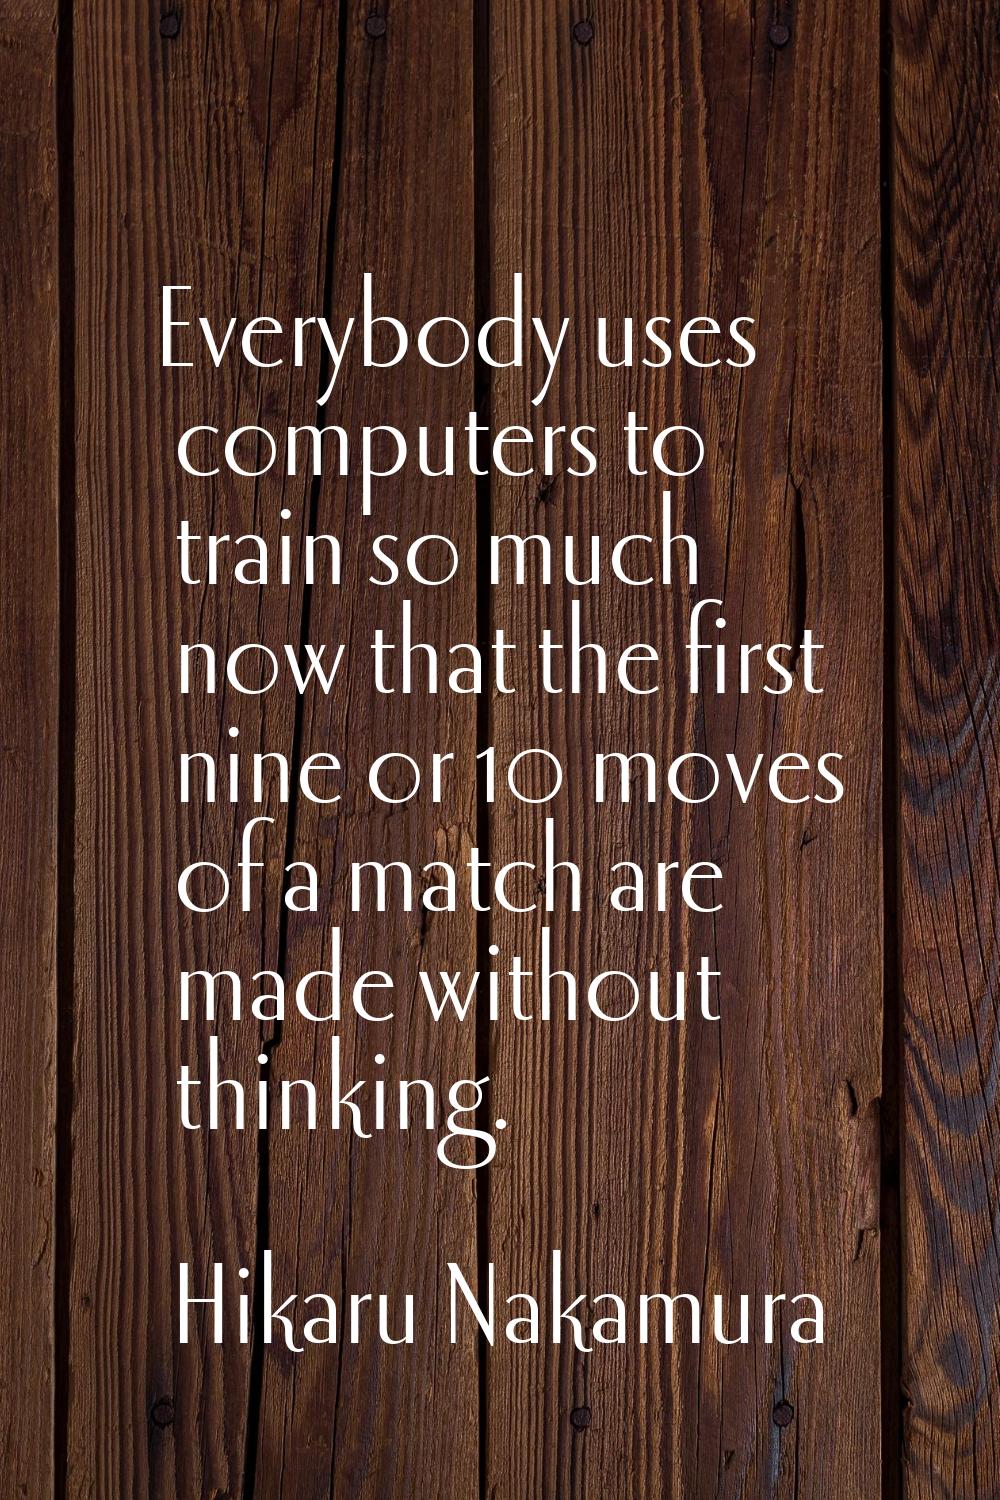 Everybody uses computers to train so much now that the first nine or 10 moves of a match are made w